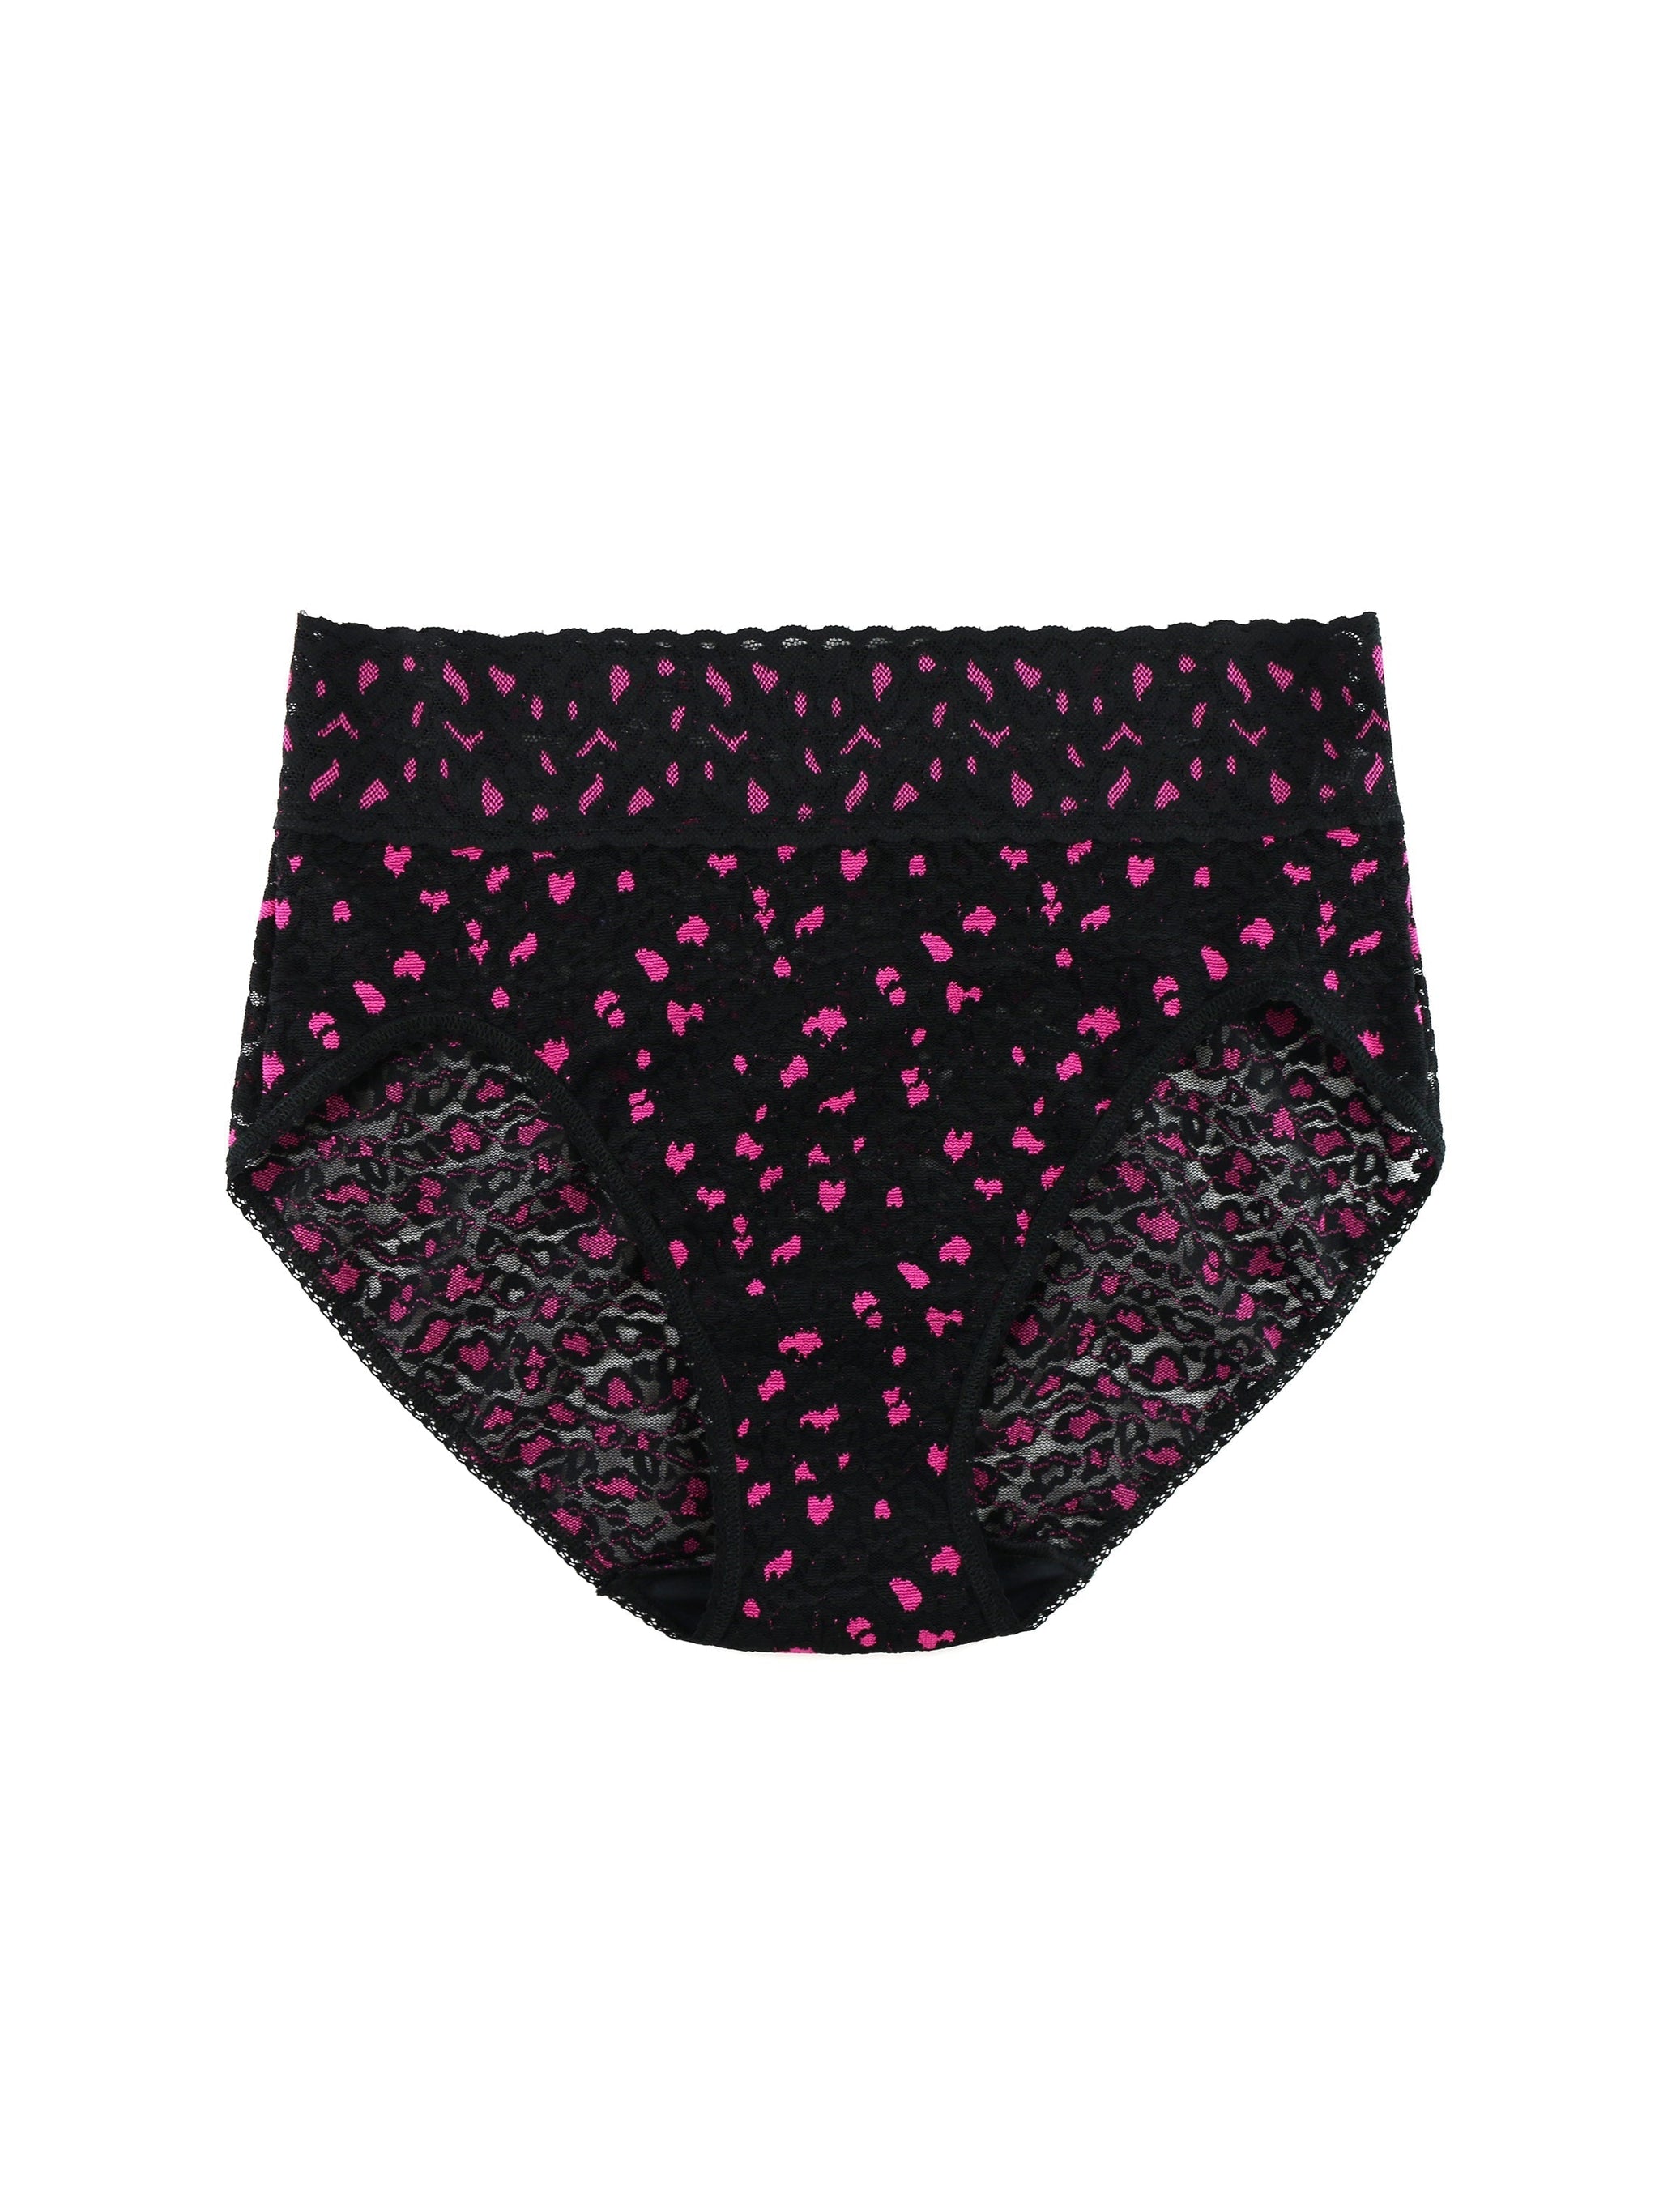 Cross Dyed Leopard French Brief Black/ Tulip Pink